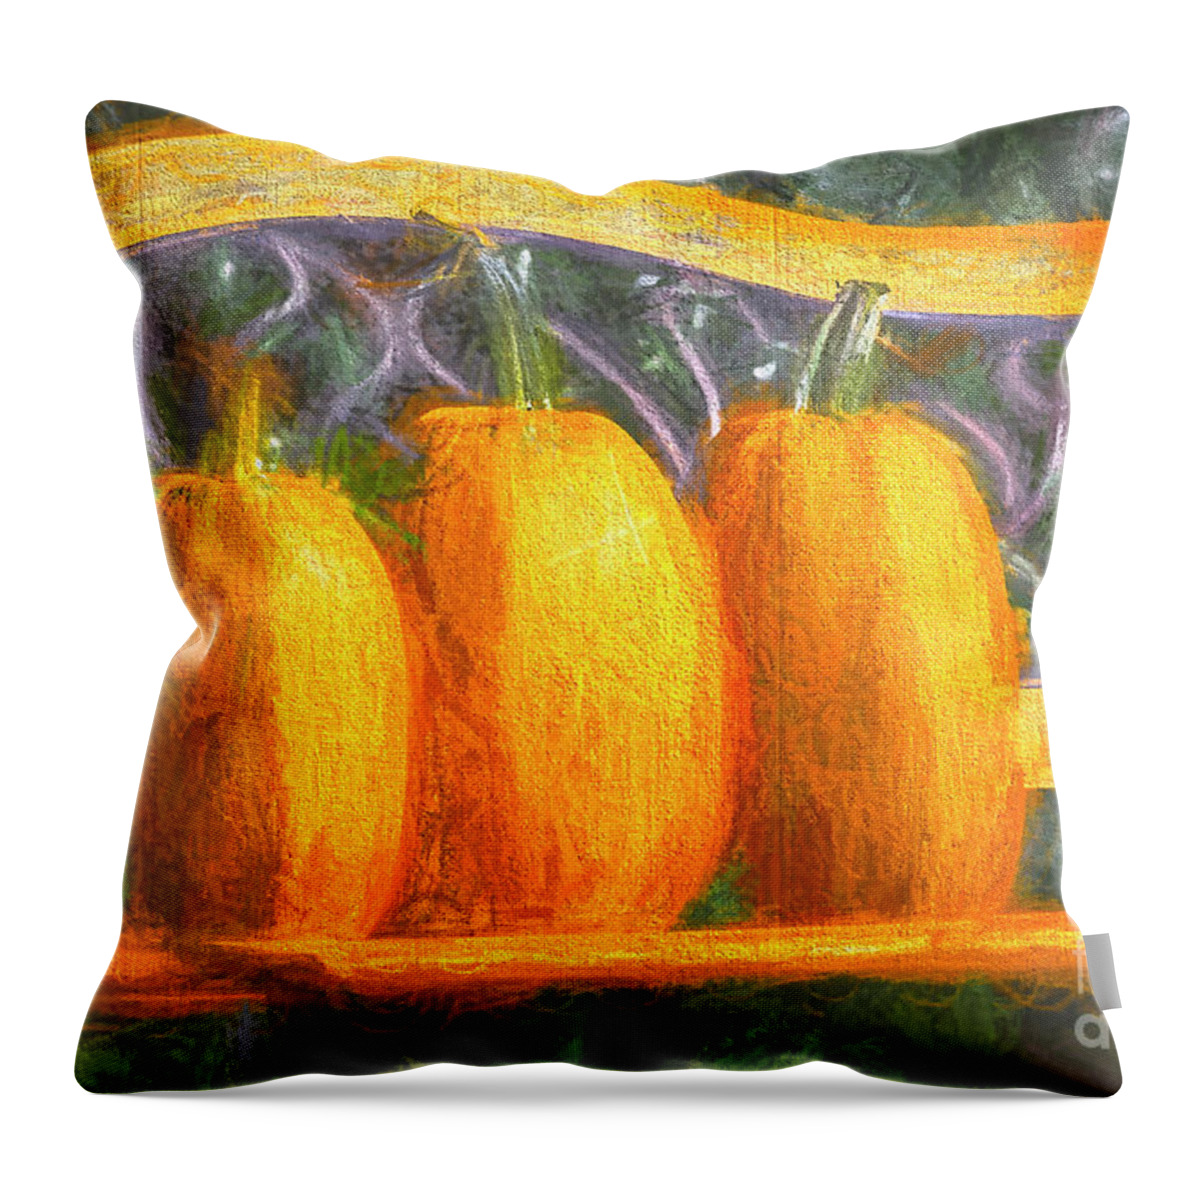 Squash Throw Pillow featuring the photograph We Three Photo Art by Sharon Talson